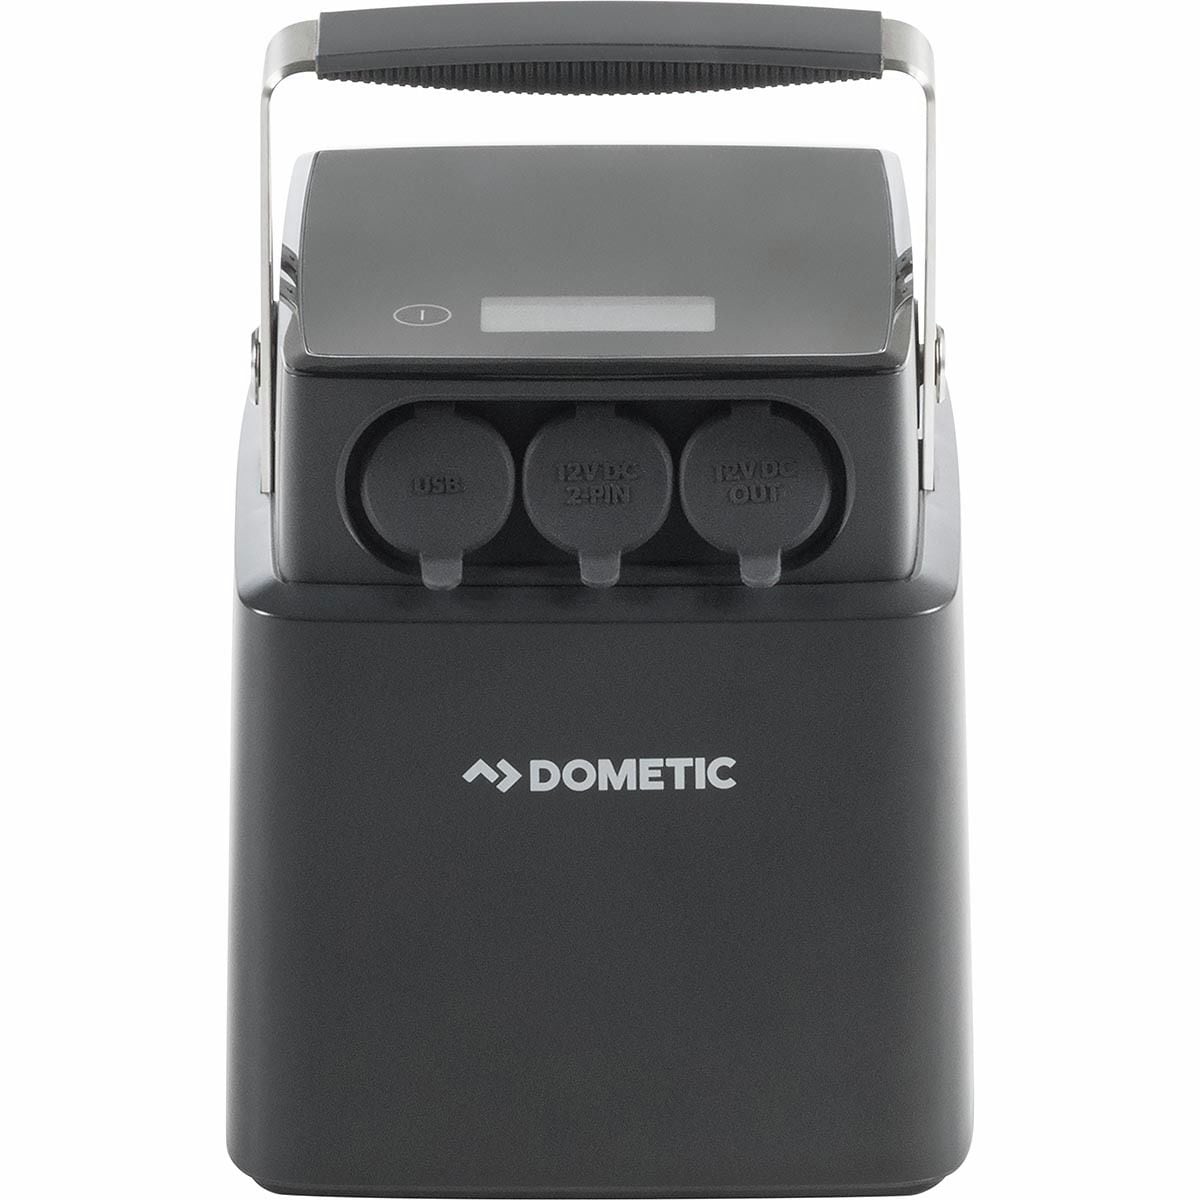 Dometic 40 Ah Portable Lithium Battery - Hike & Camp